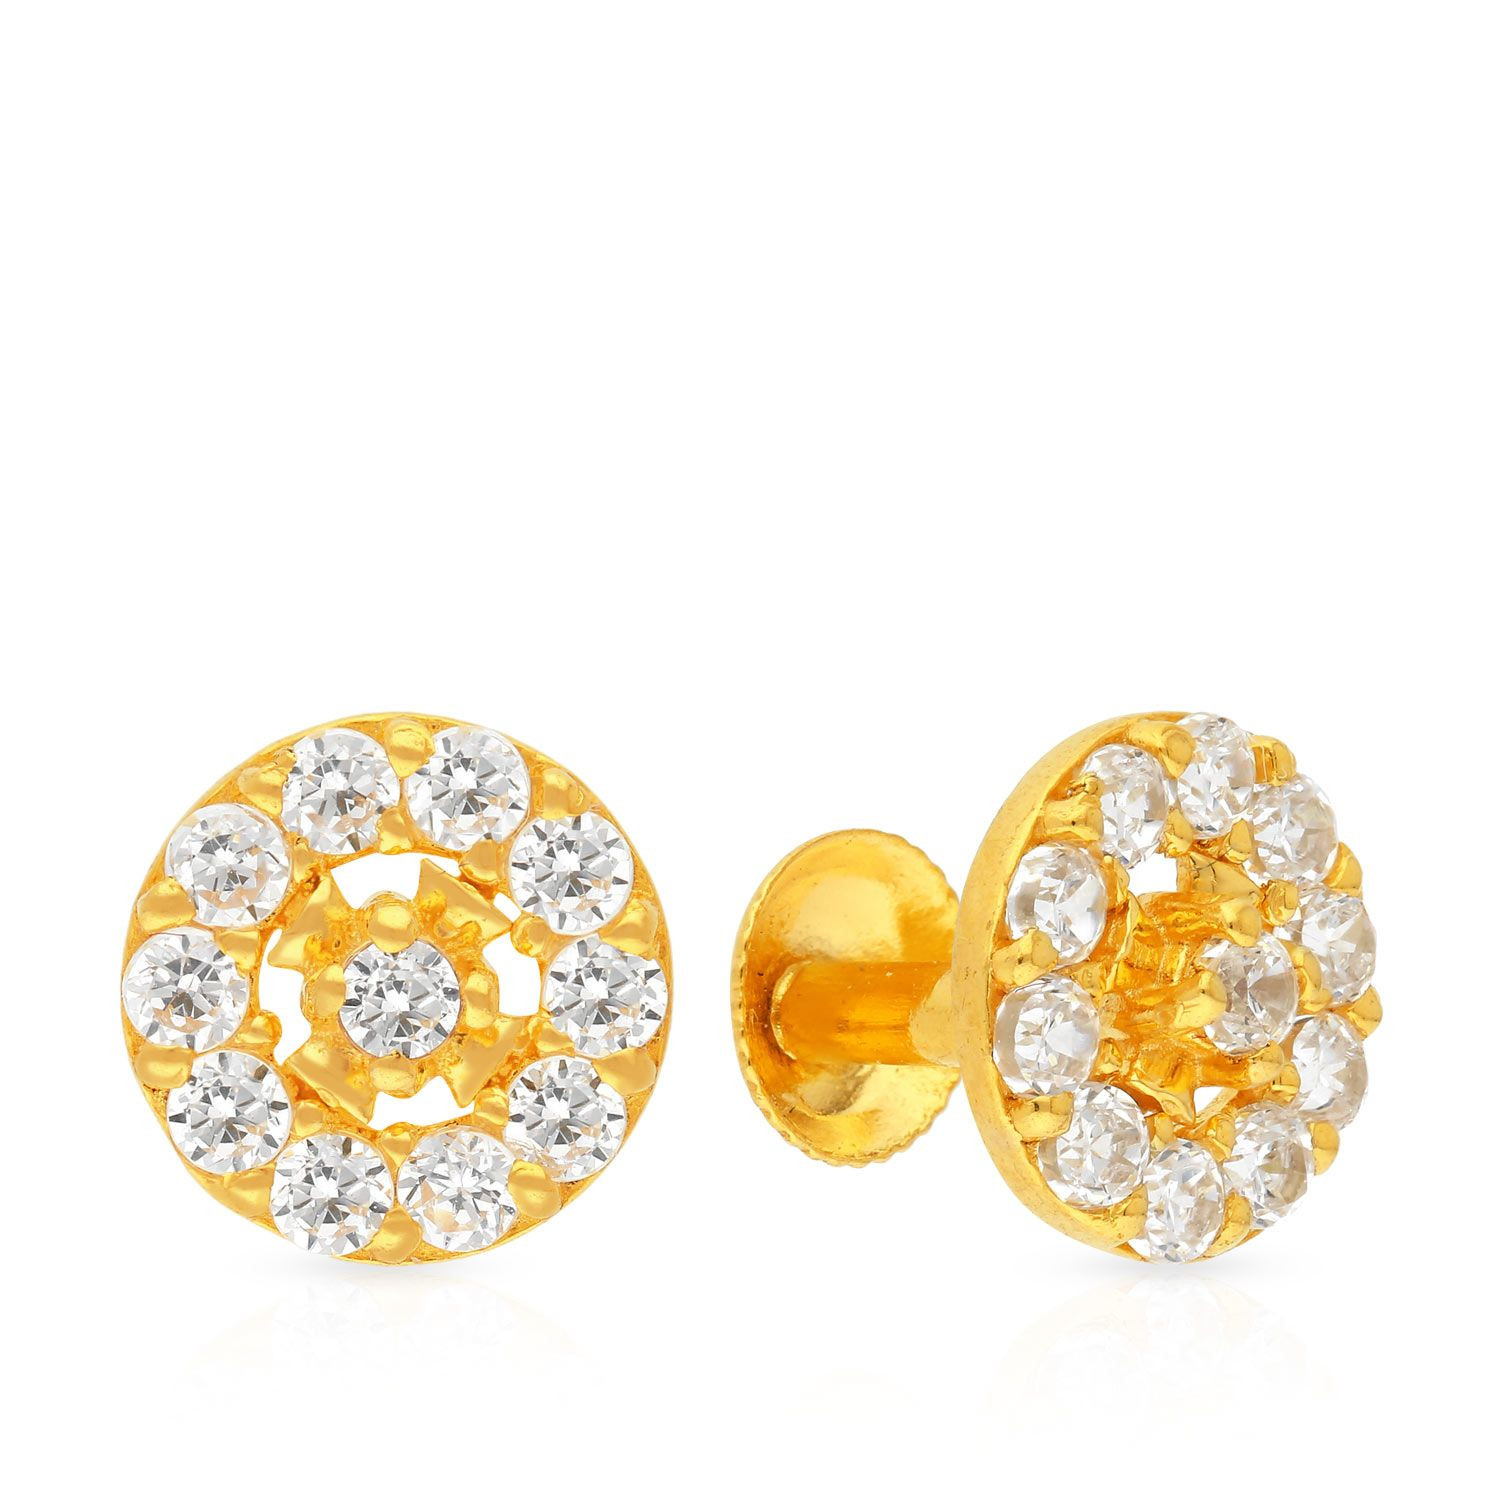 Buy Online Trendy Gold Colour Mango Shaped Earrings for Girls and Women   One Stop Fashion